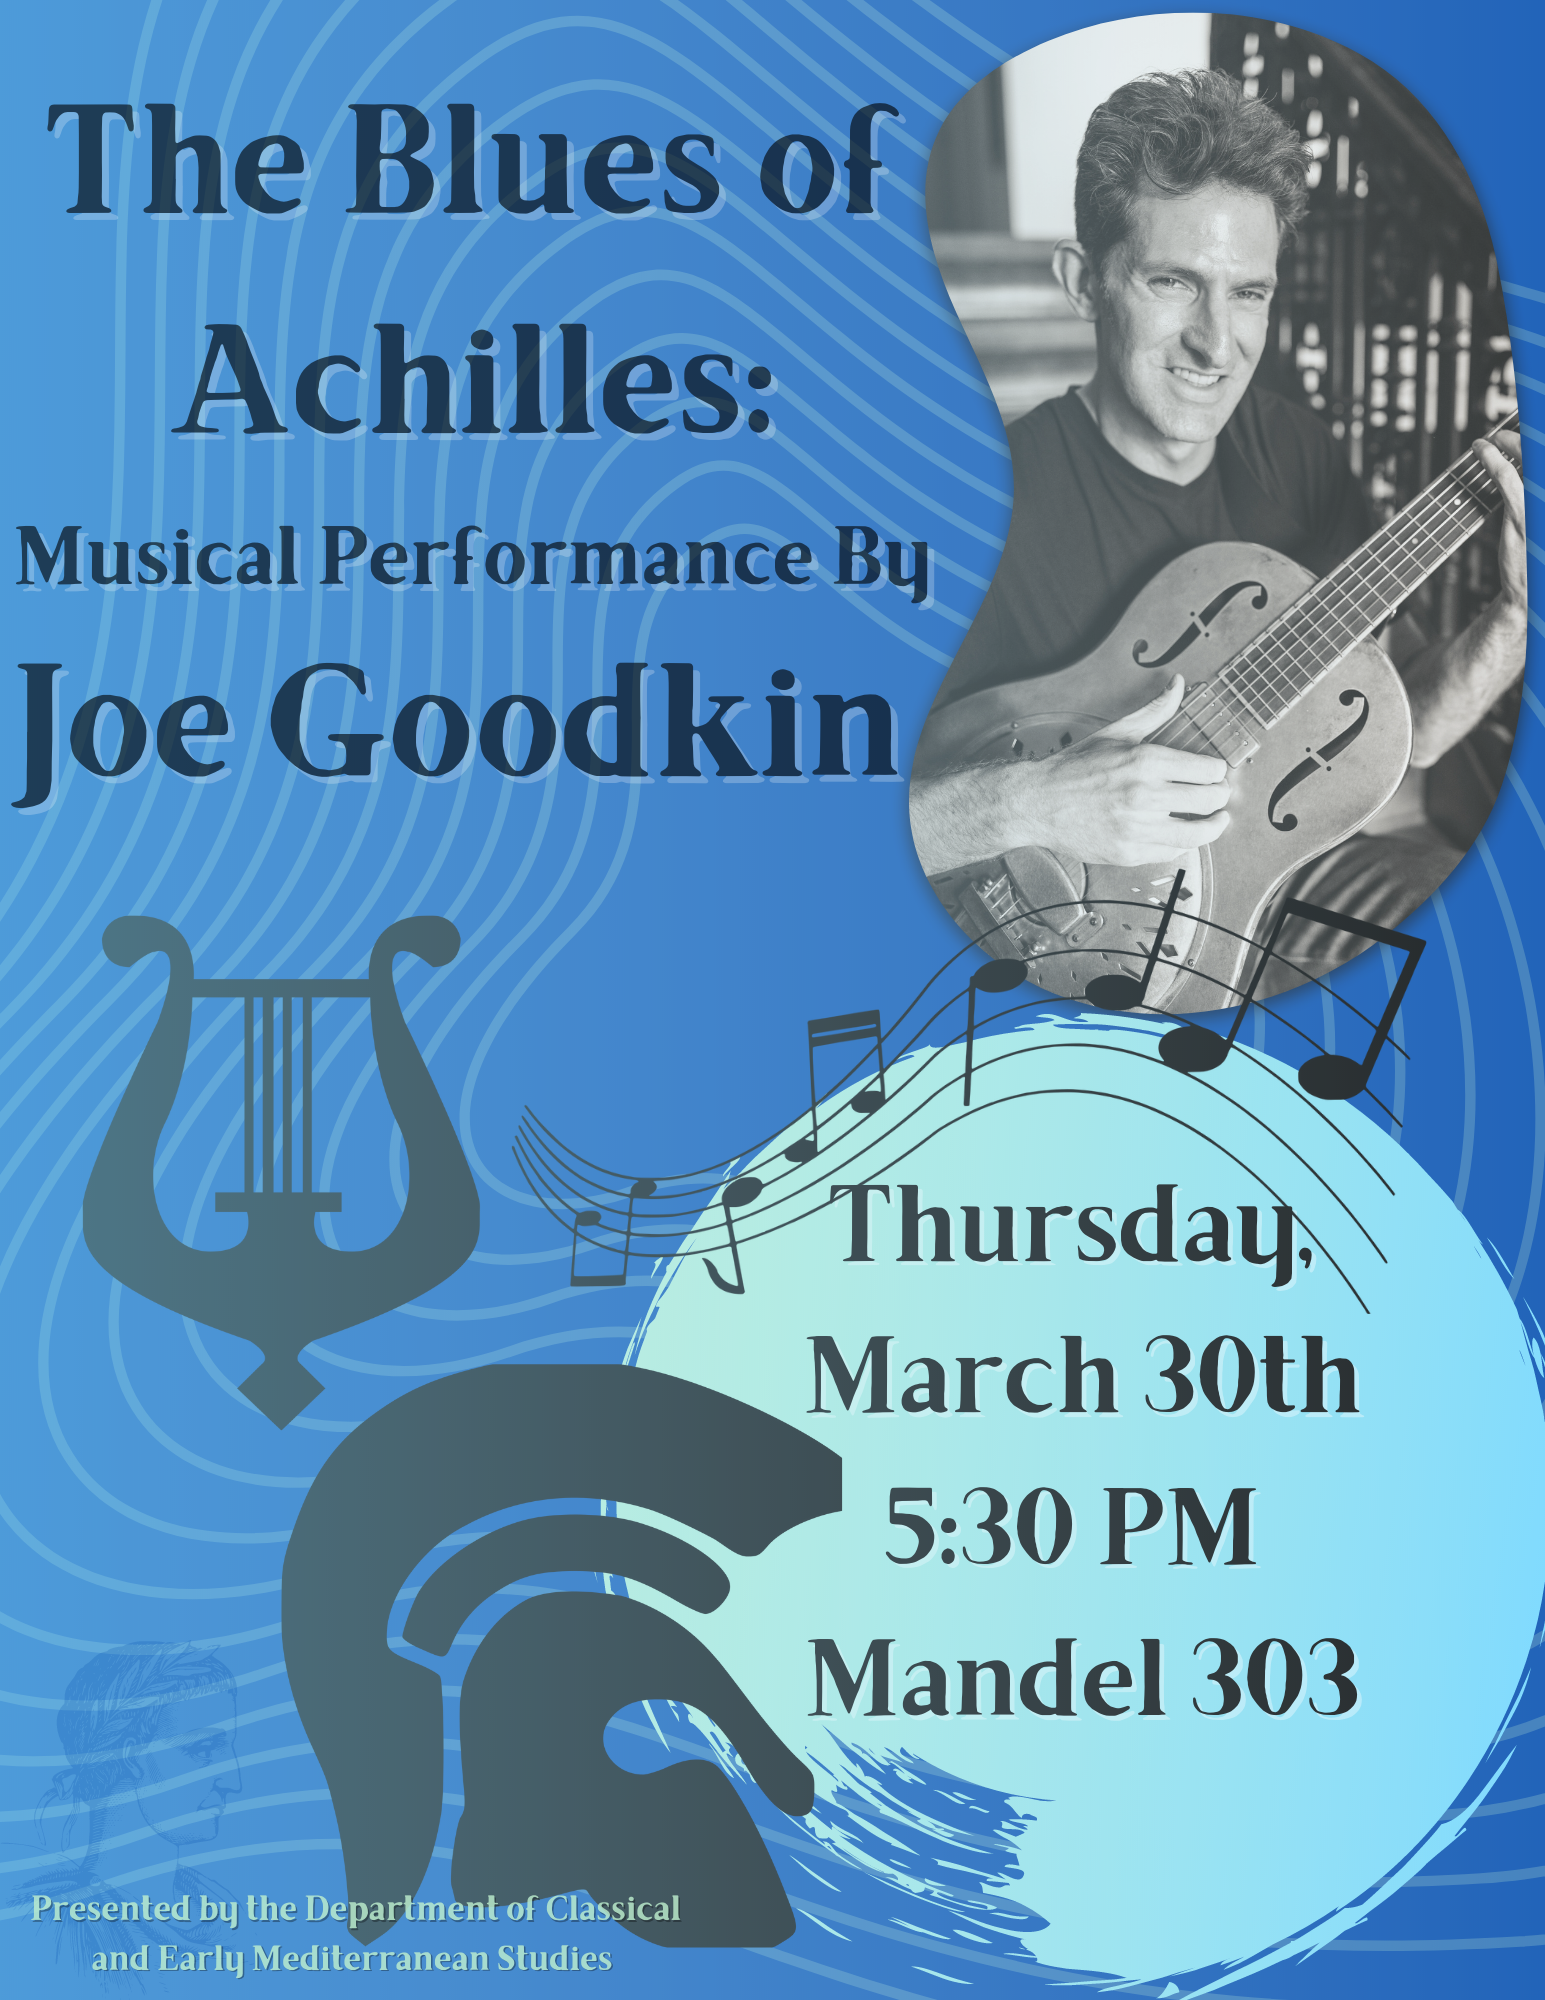 The Blues of Achilles musical event with Joe Goodkin. On March 30th, at 5:30 PM, in Mandel 303. 